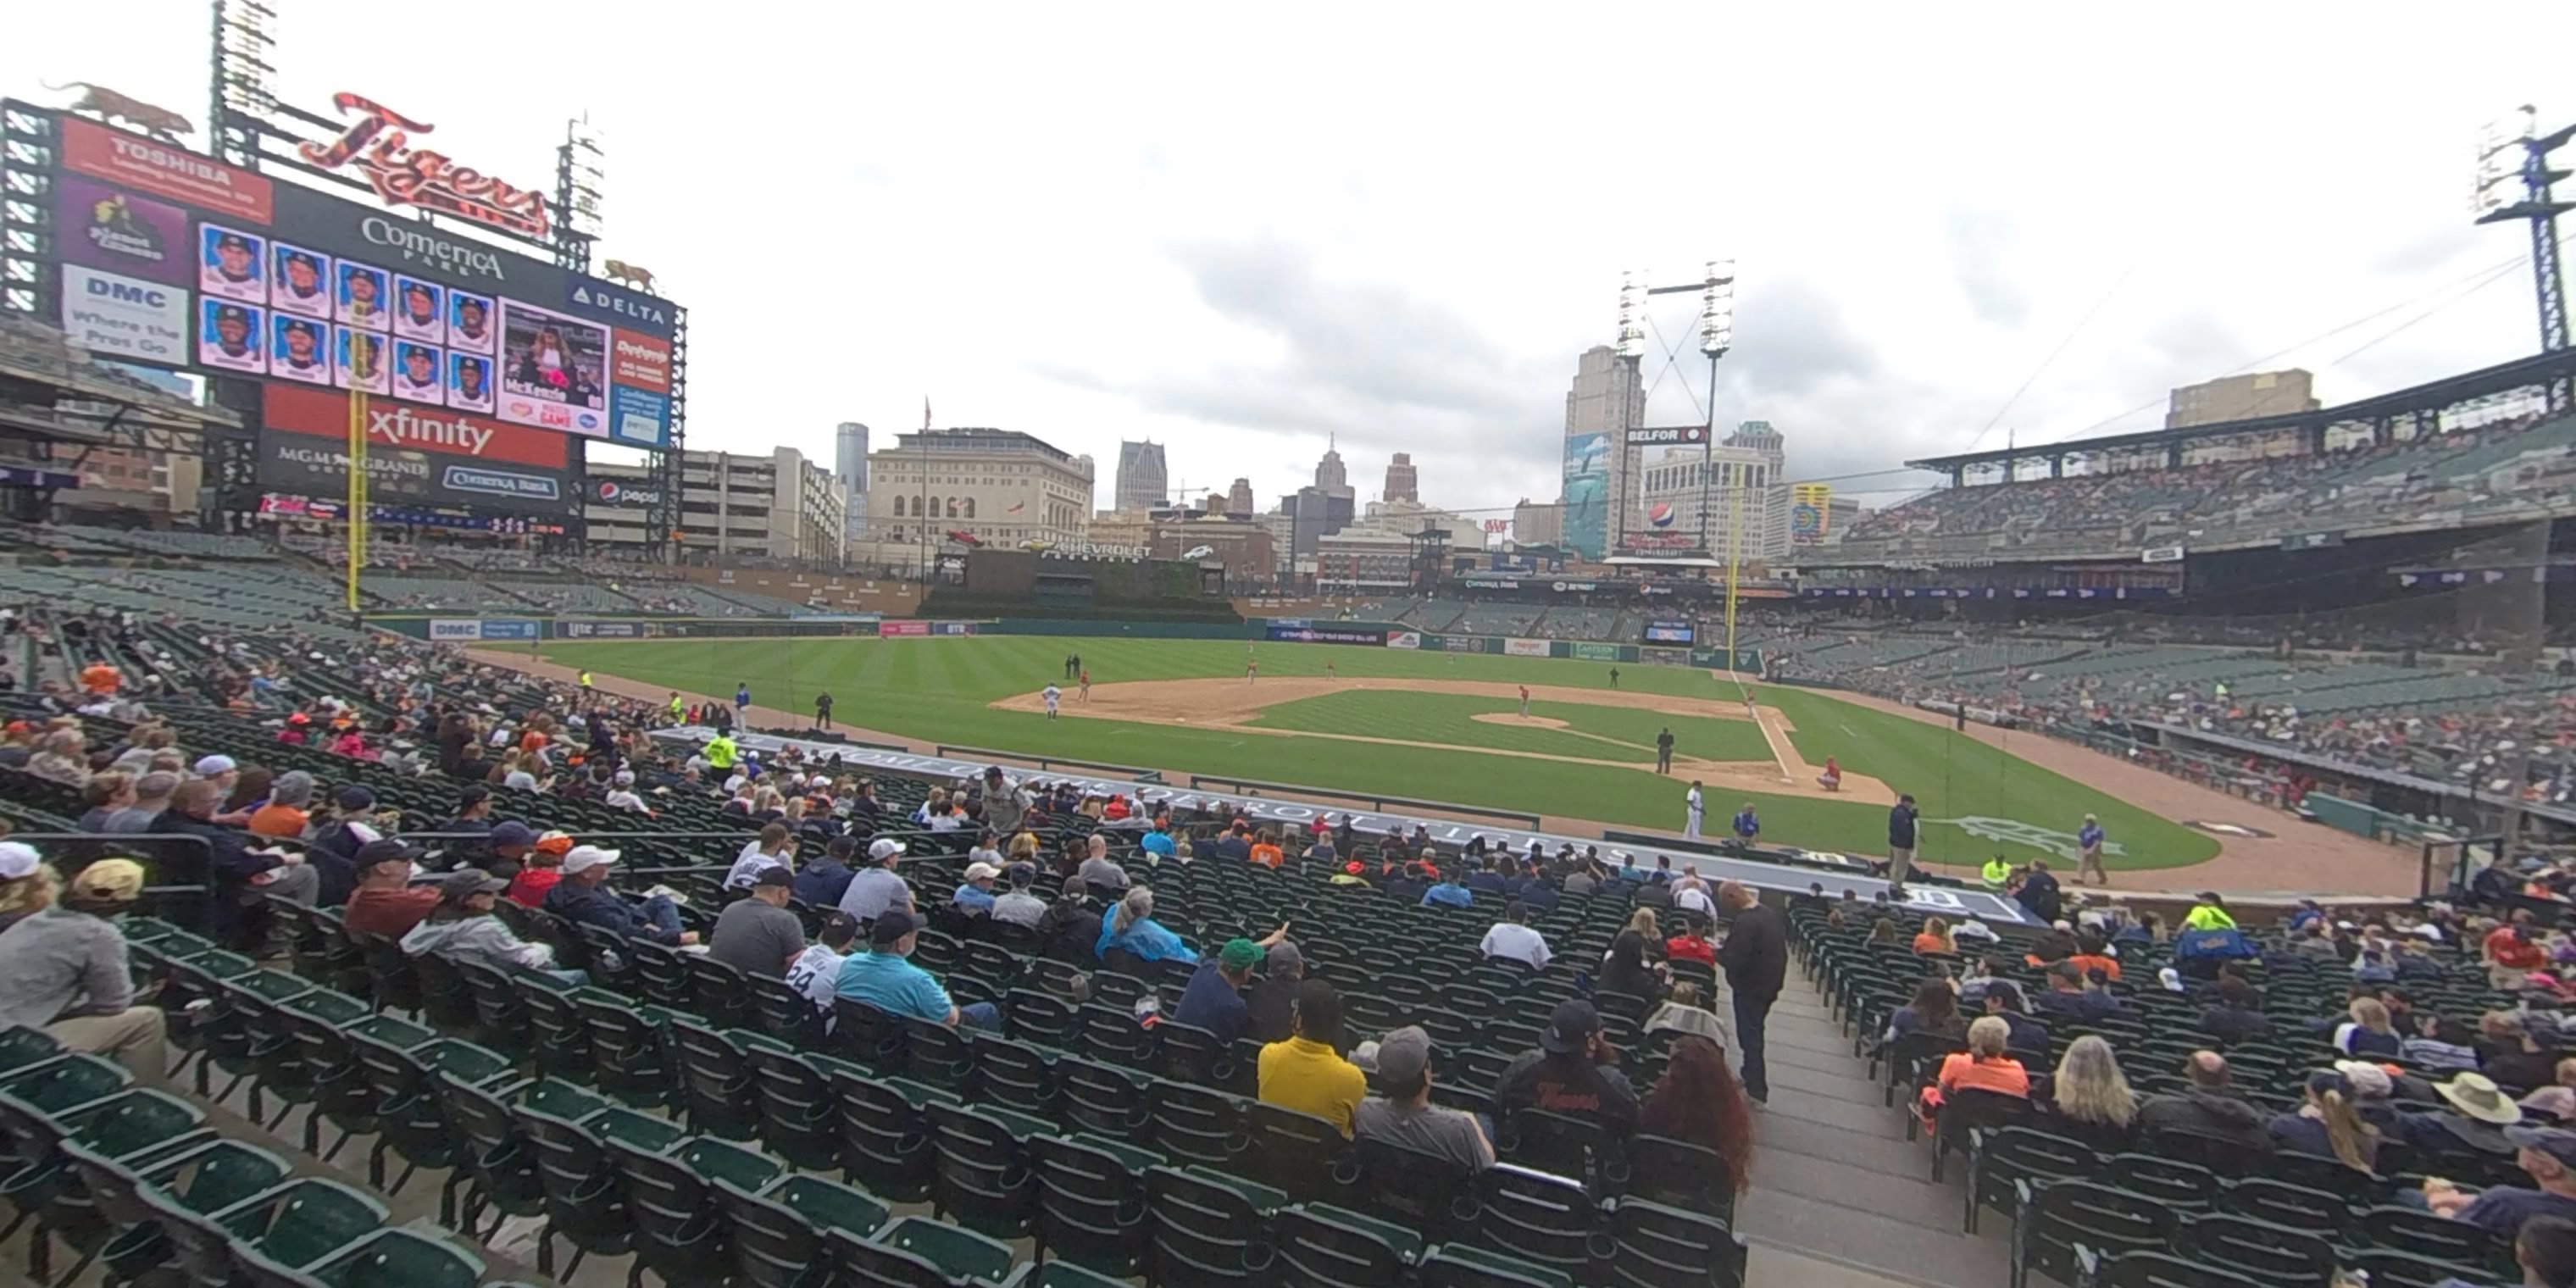 section 131 panoramic seat view  for baseball - comerica park